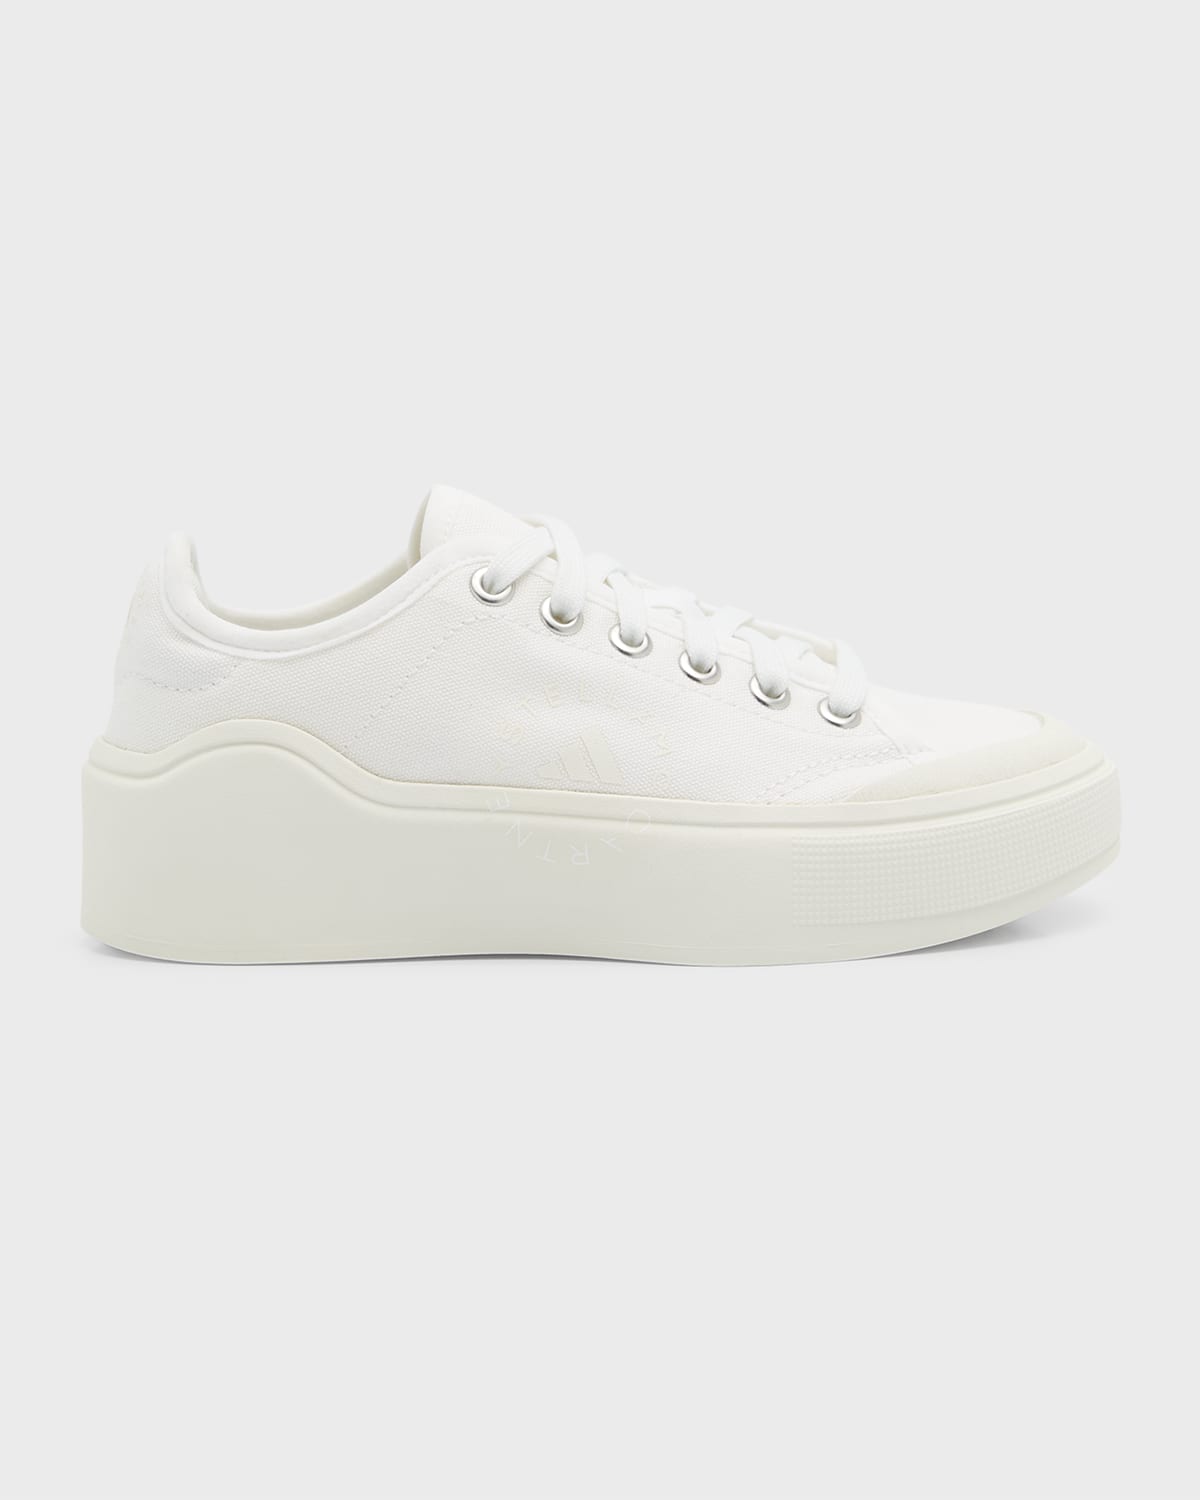 ADIDAS BY STELLA MCCARTNEY SOLID CANVAS COURT SNEAKERS